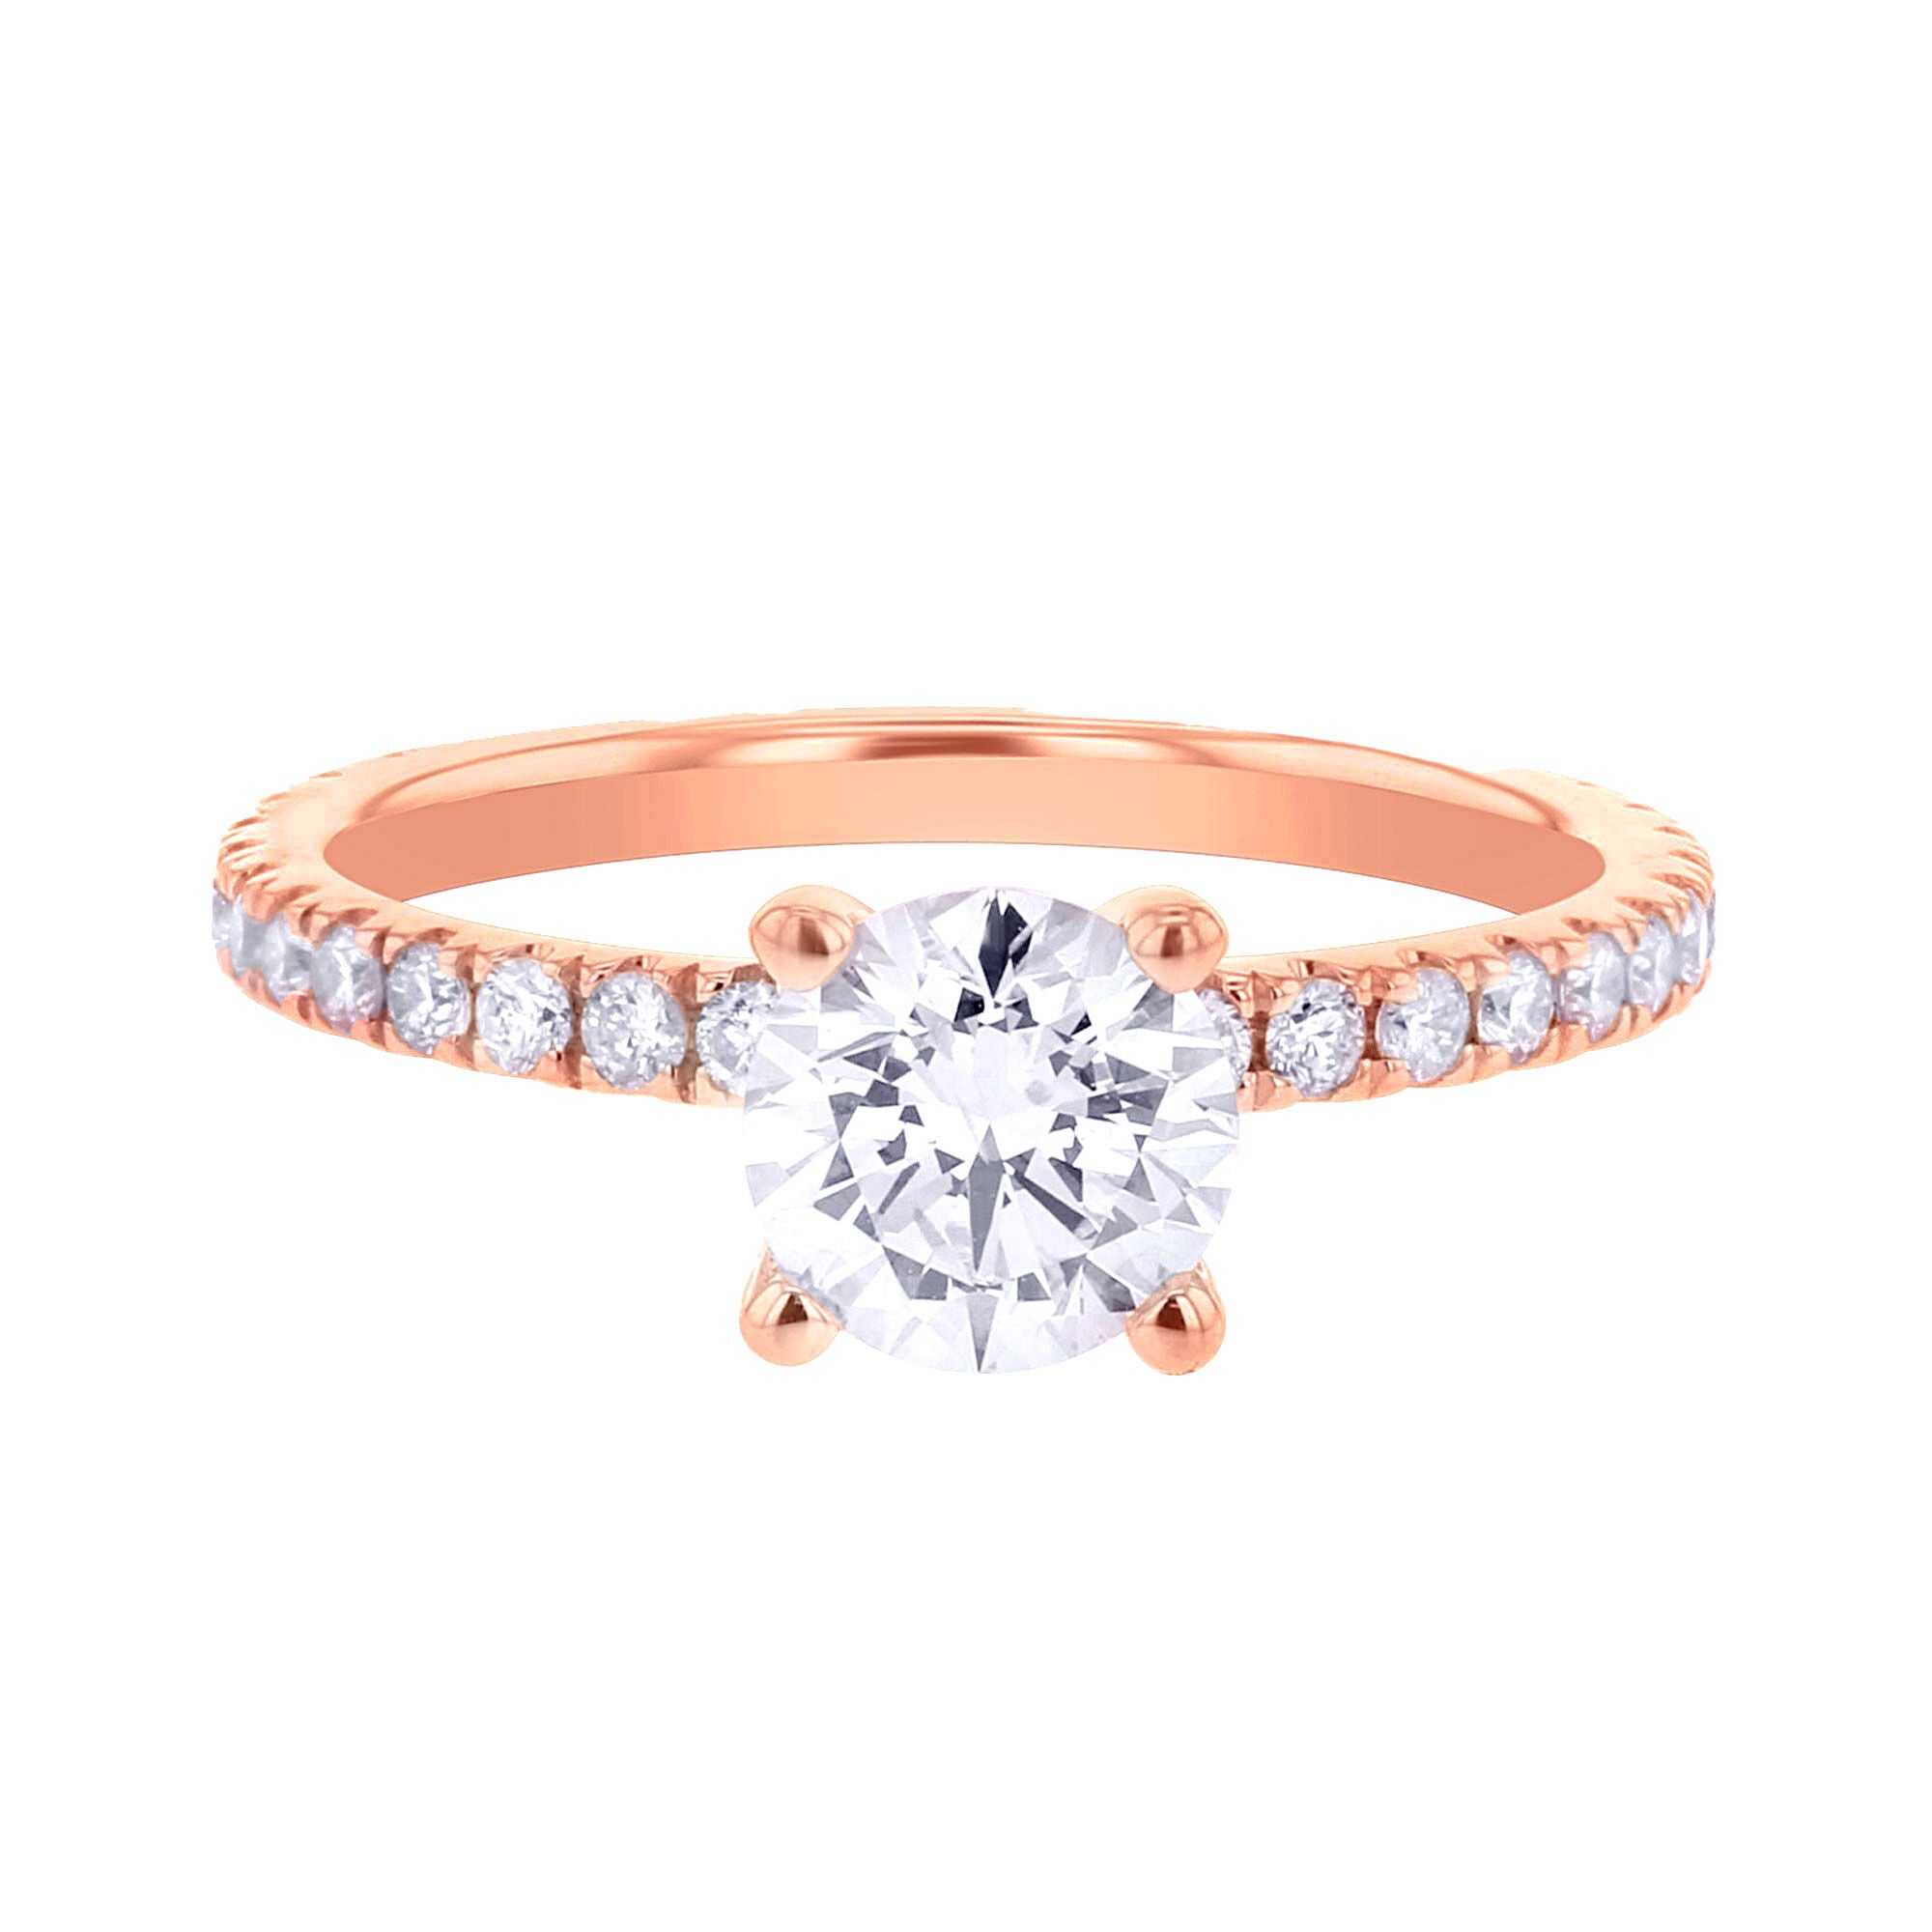 Lorena Ready for Love Diamond Engagement Ring 1 1/3ct